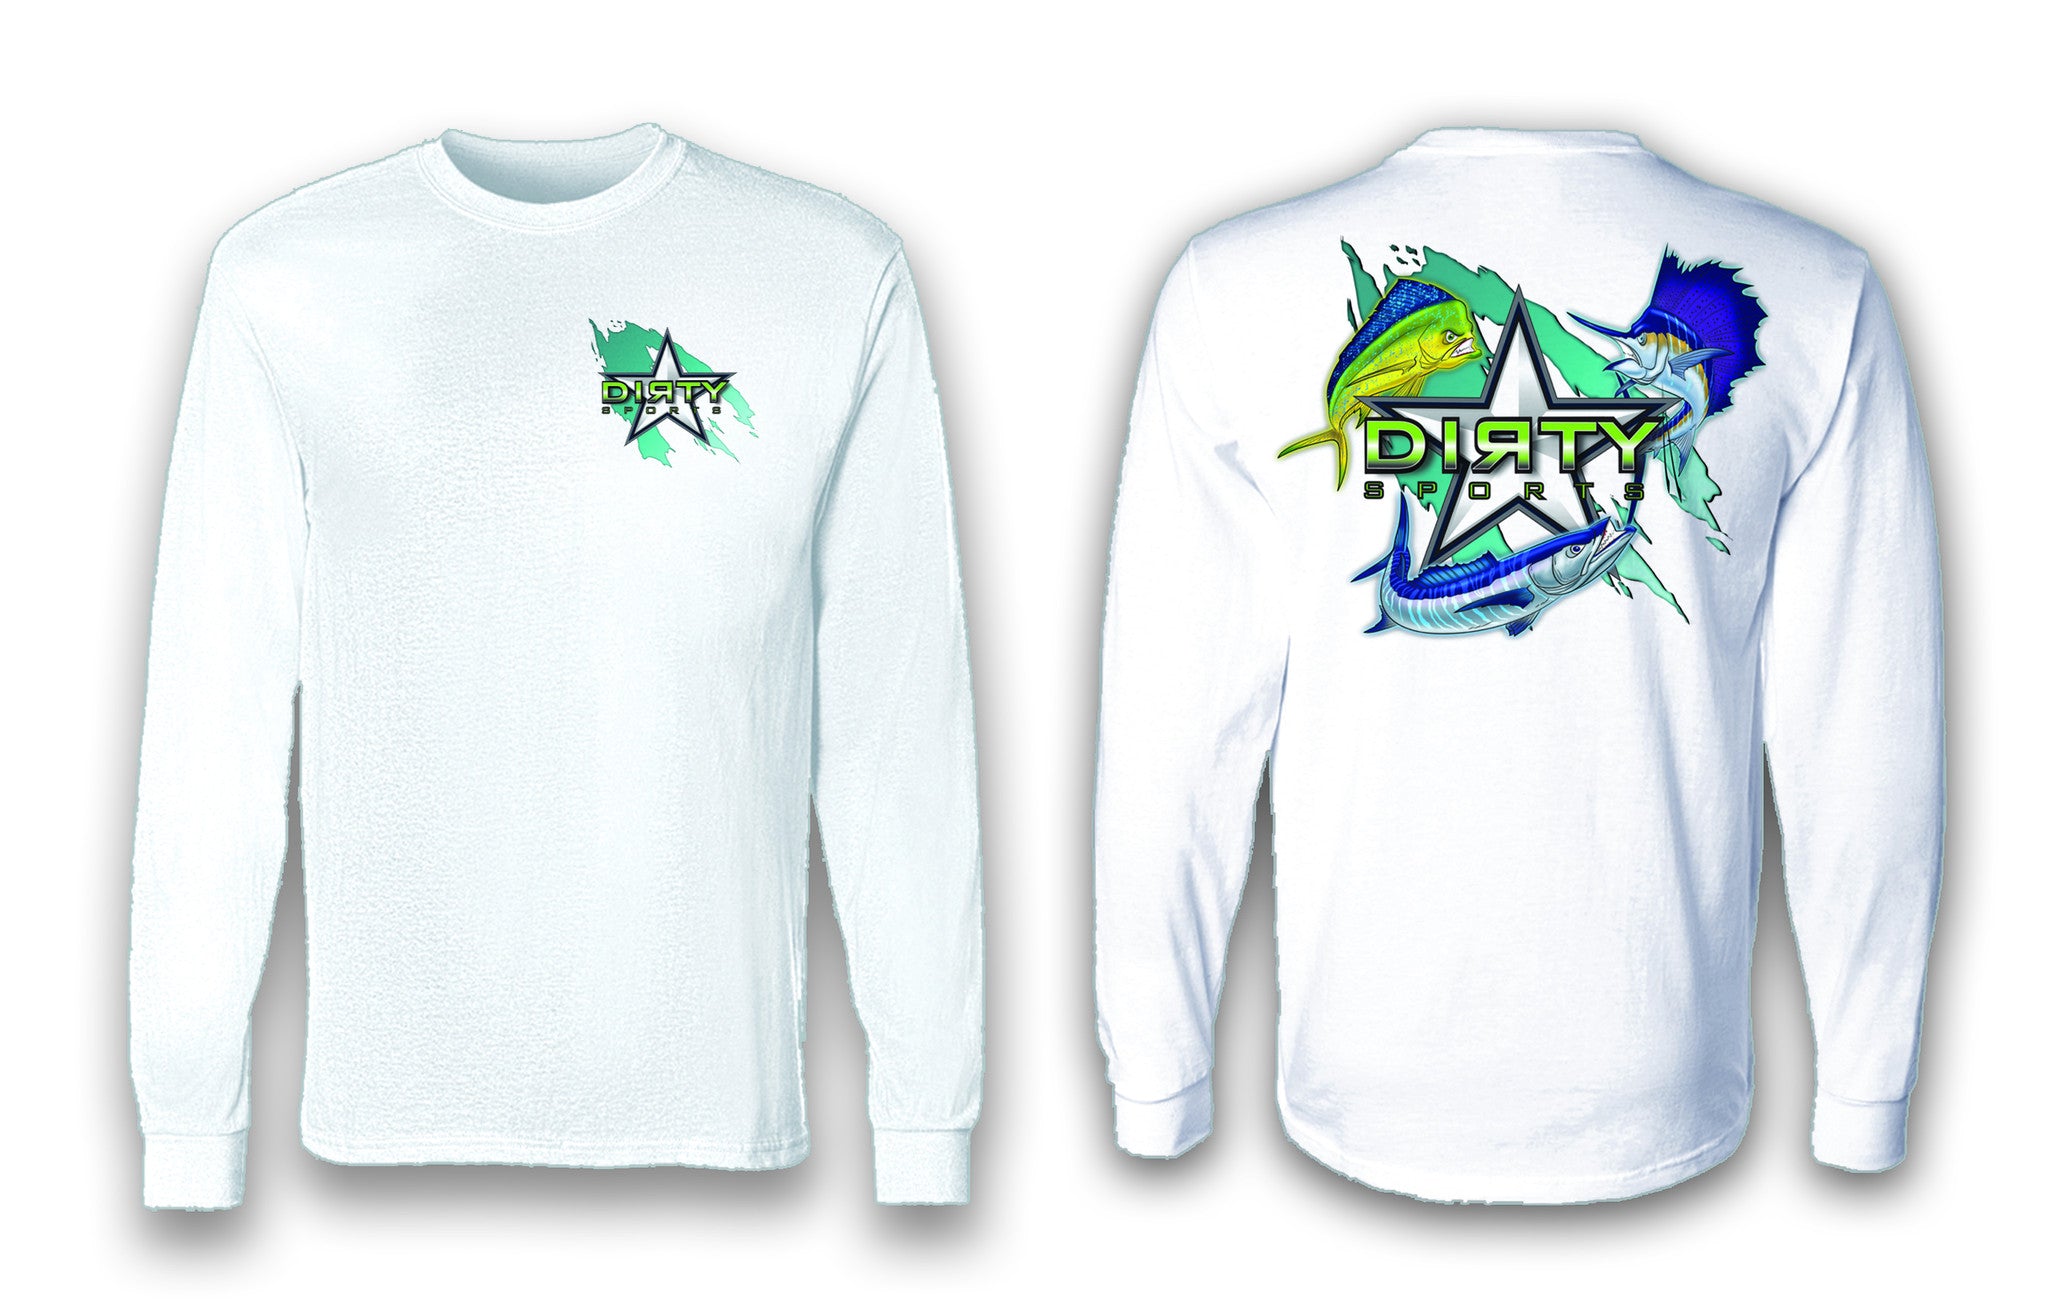 Mean Fish - Long Sleeve Polyester Fishing Shirt - Dirty Sports Wear